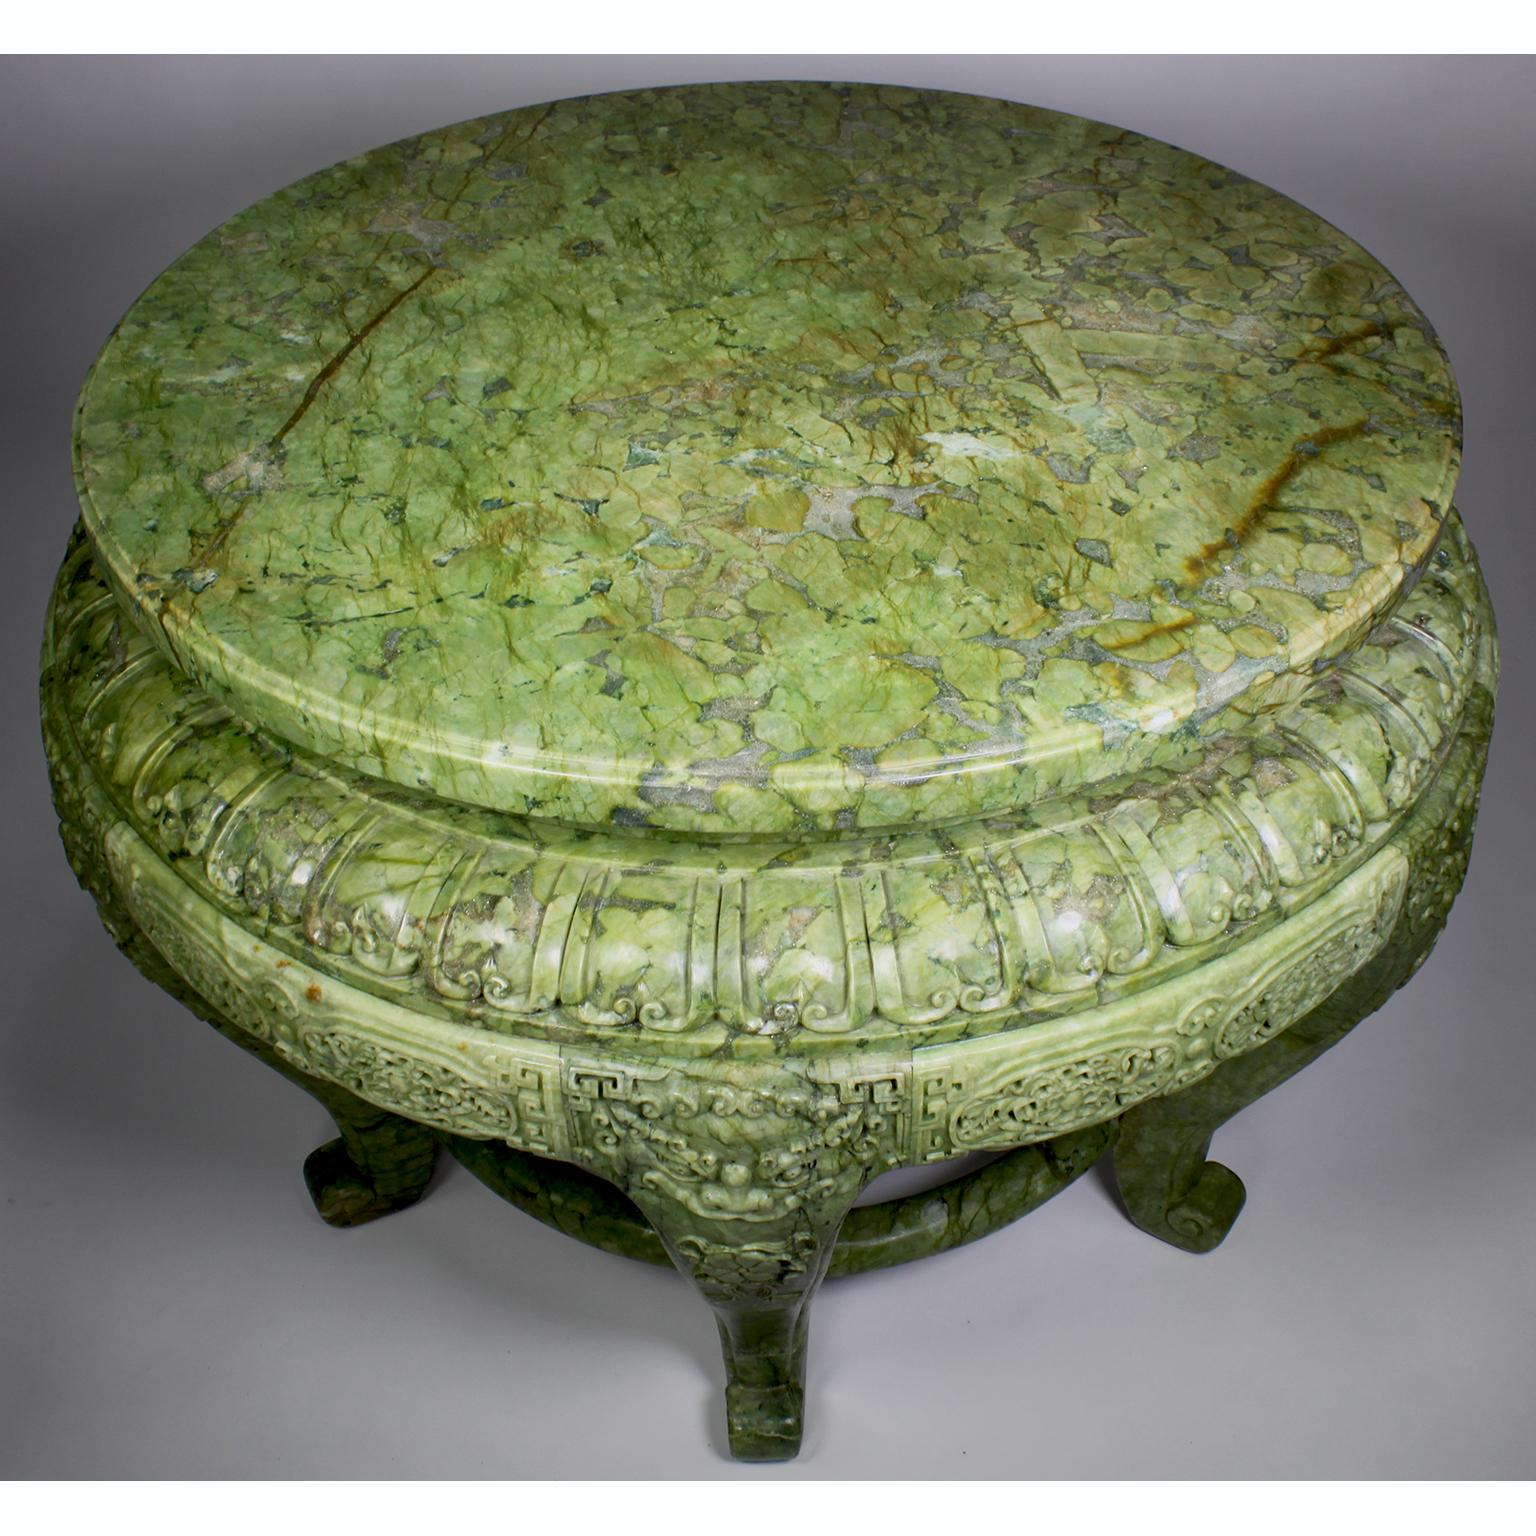 A Chinese late 20th century finely carved green serpentine center table. The six-legged pedestal table entirely carved of green serpentine, with a pierced apron in a Cantonese design, flanked on top of each leg with relief carvings depicting Foo